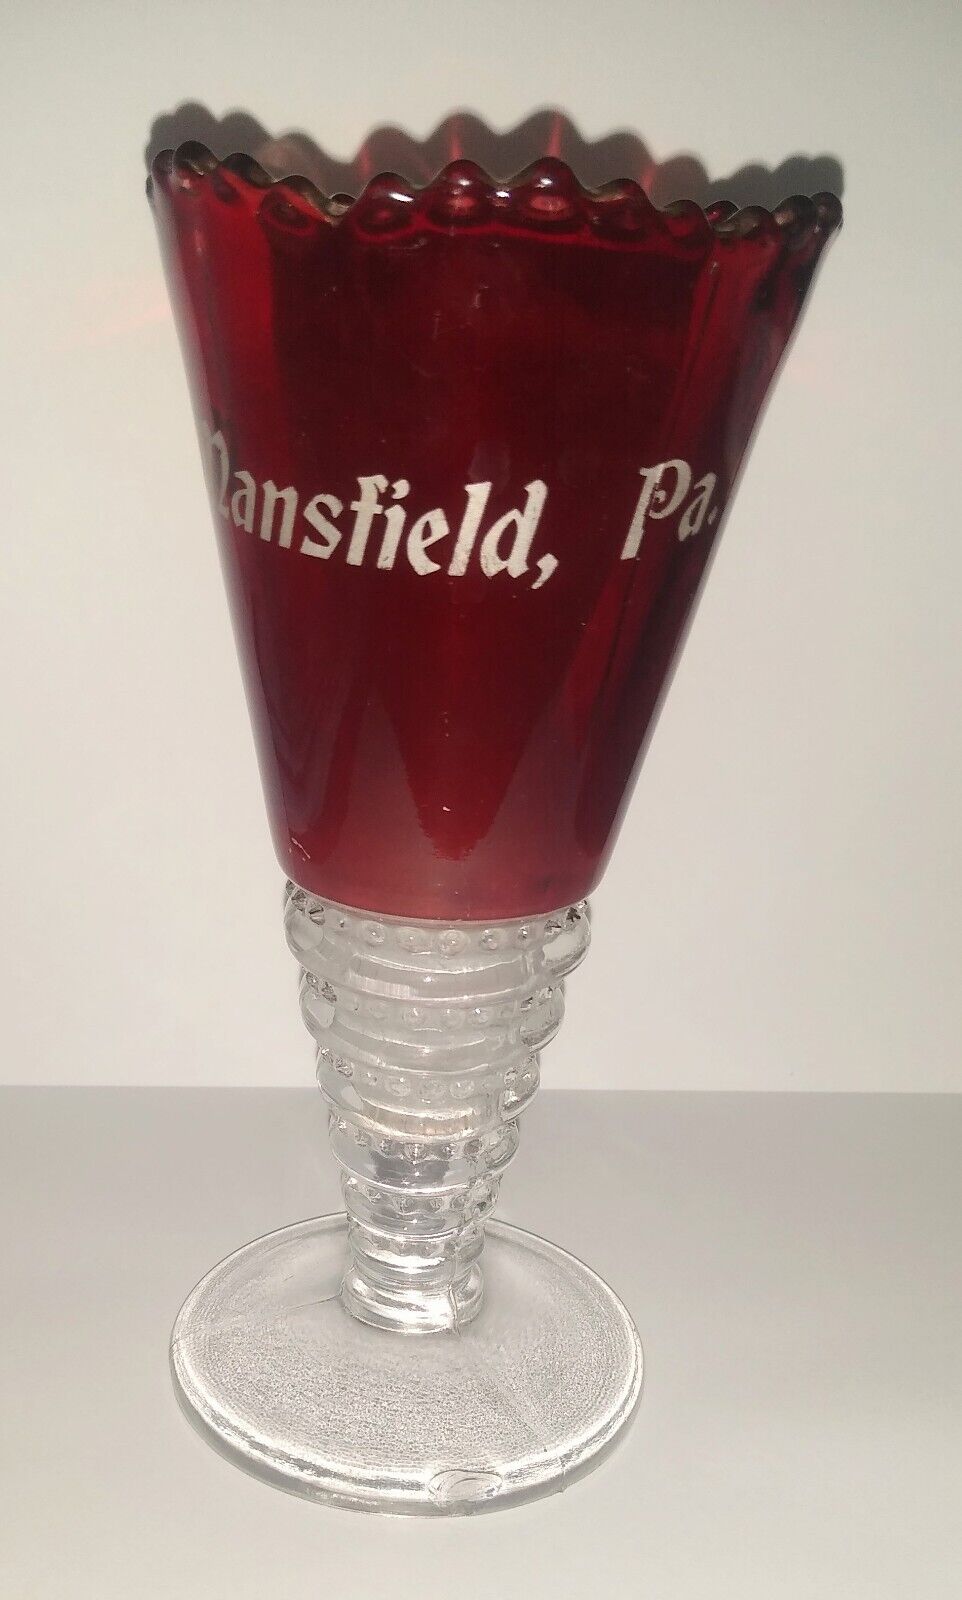 Mansfield, Pa Small Vintage Ruby Red Flash Glass Souvenir Vase